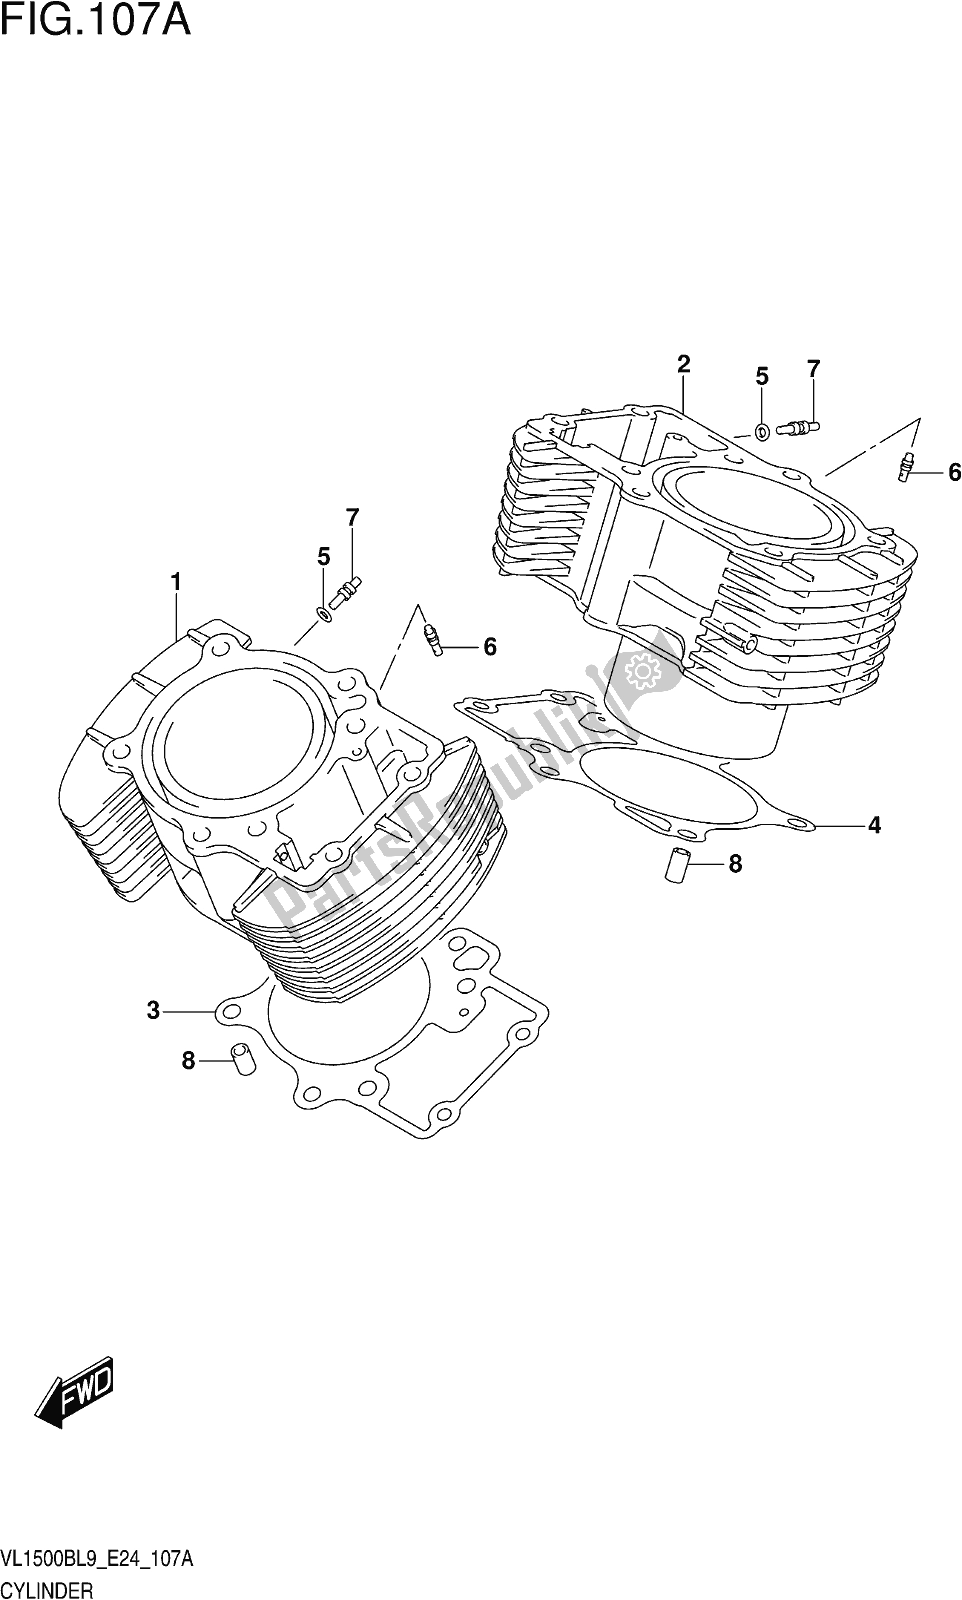 All parts for the Fig. 107a Cylinder of the Suzuki VL 1500B 2019